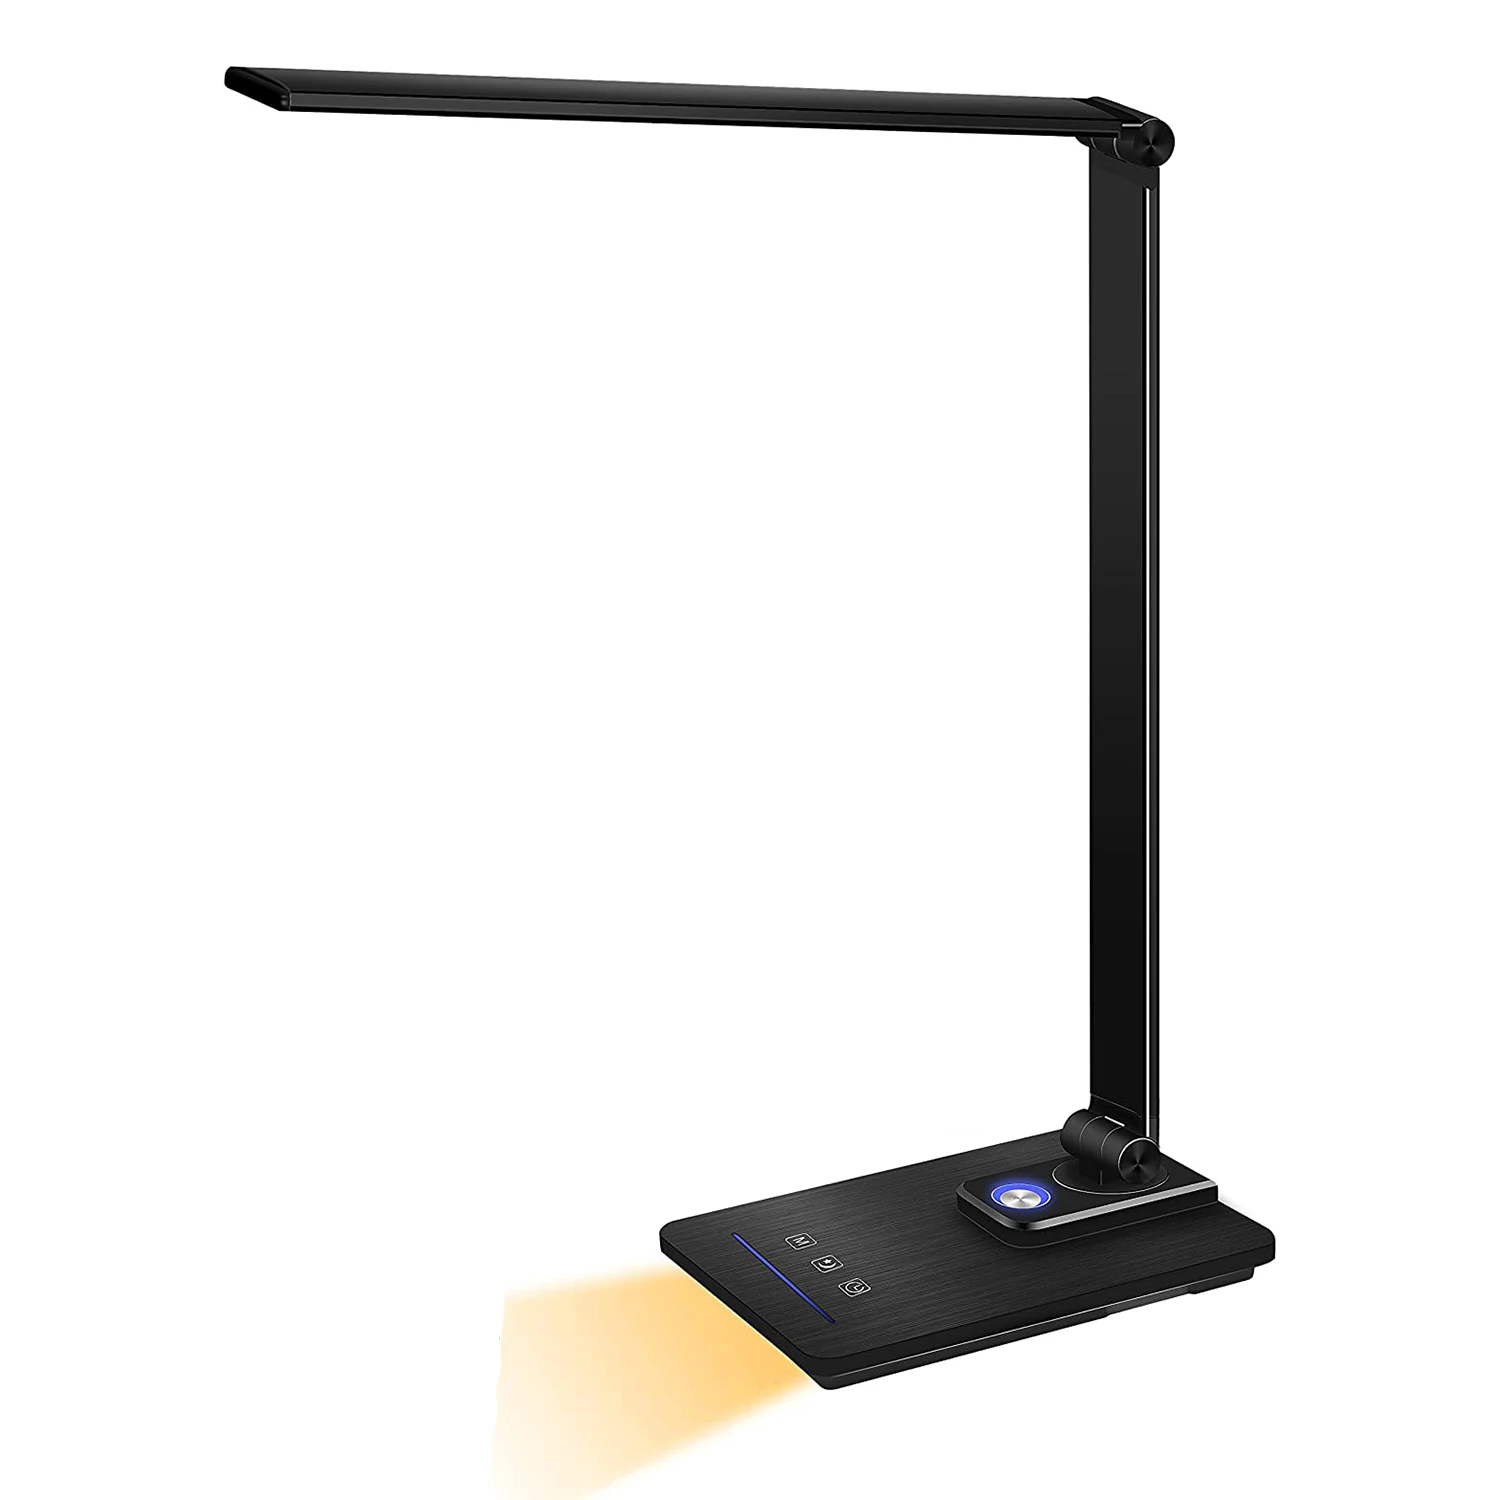 

LED Desk Lamp,Dimmable Desk Light,5 Colors Modes and 6 Brightness Levels,With USB Charging Port, Night Light(Black)